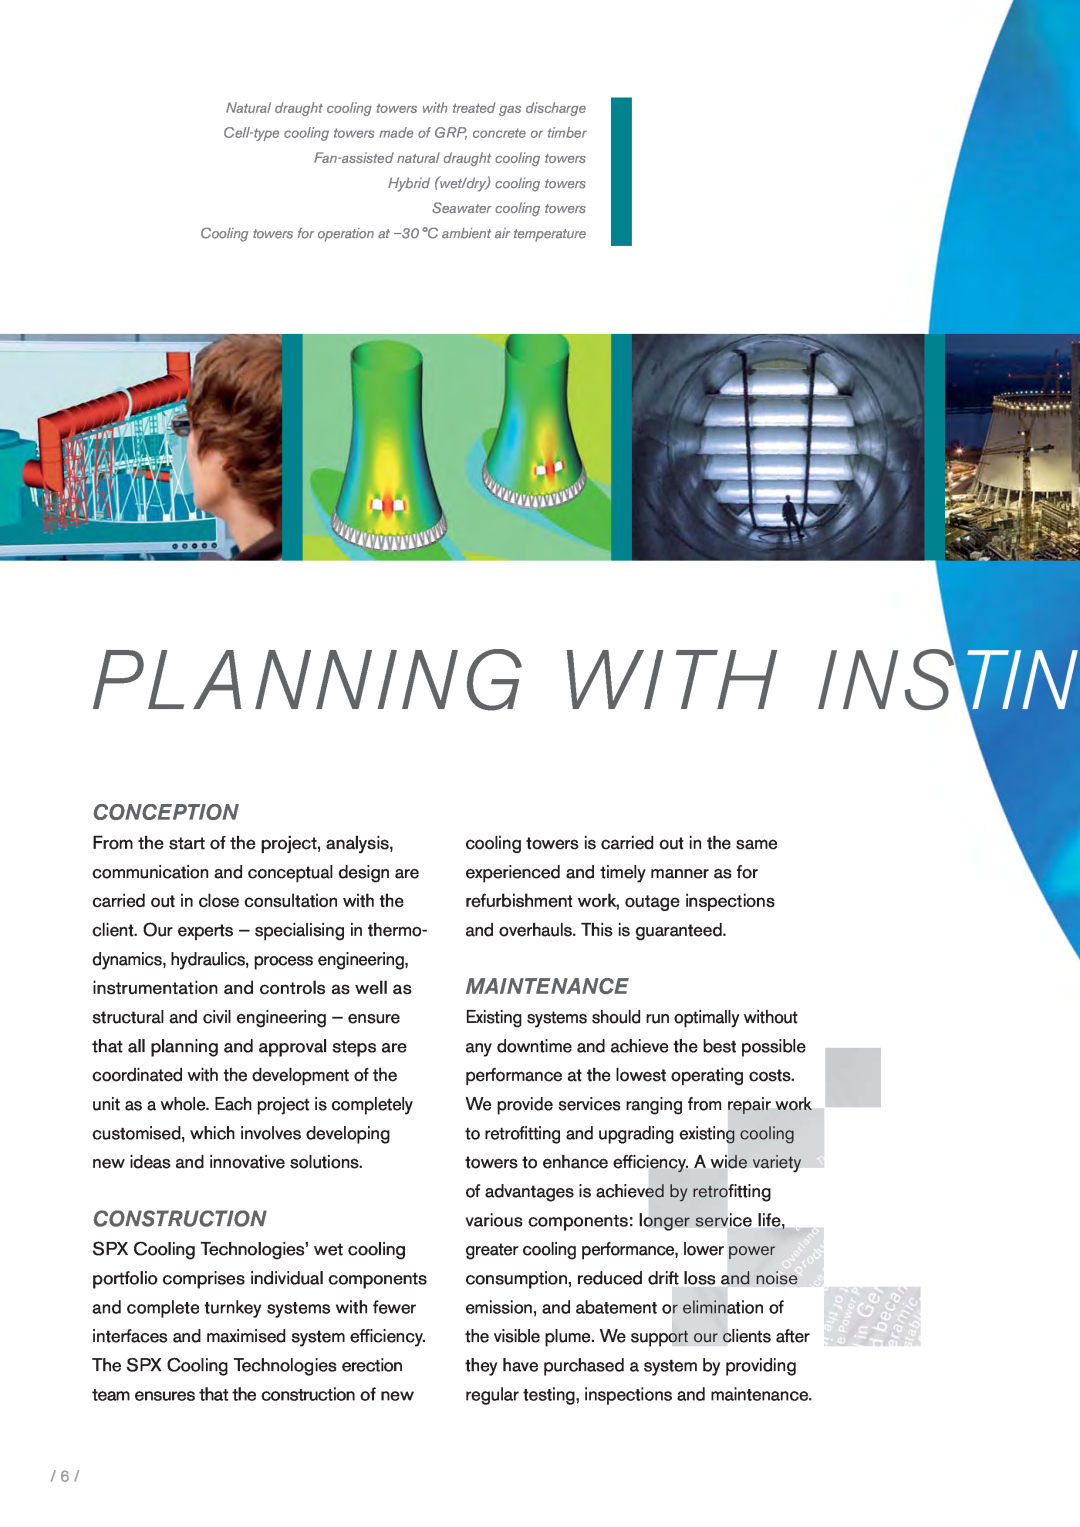 SPX Cooling Technologies BA-07011 manual Planning With Instin, Conception, Construction, Maintenance 